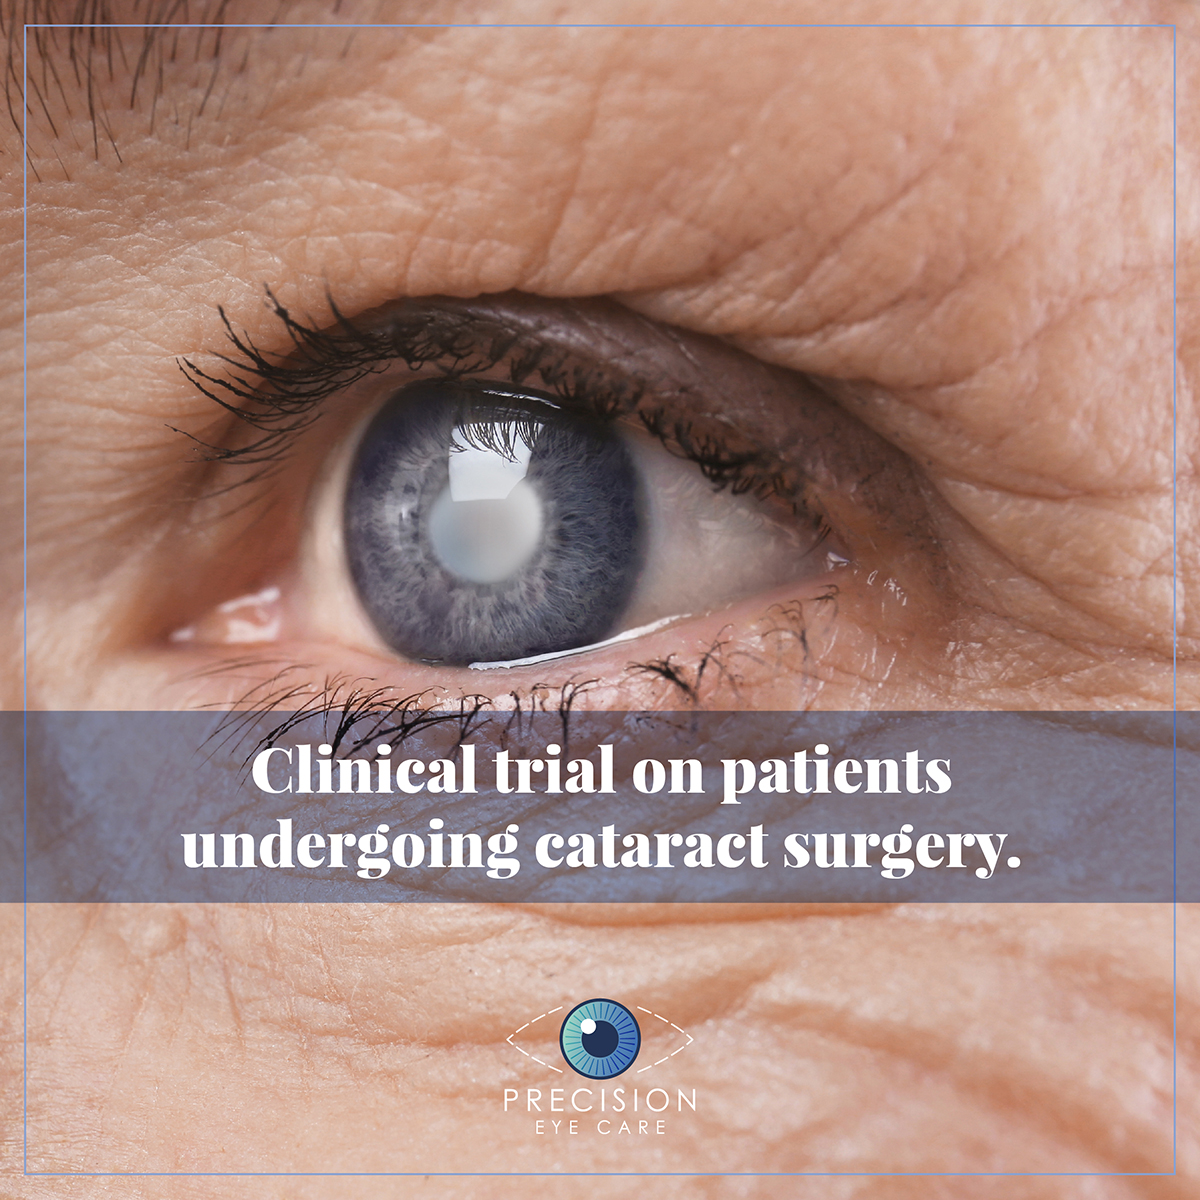 Clinical trial on patients undergoing cataract surgery.